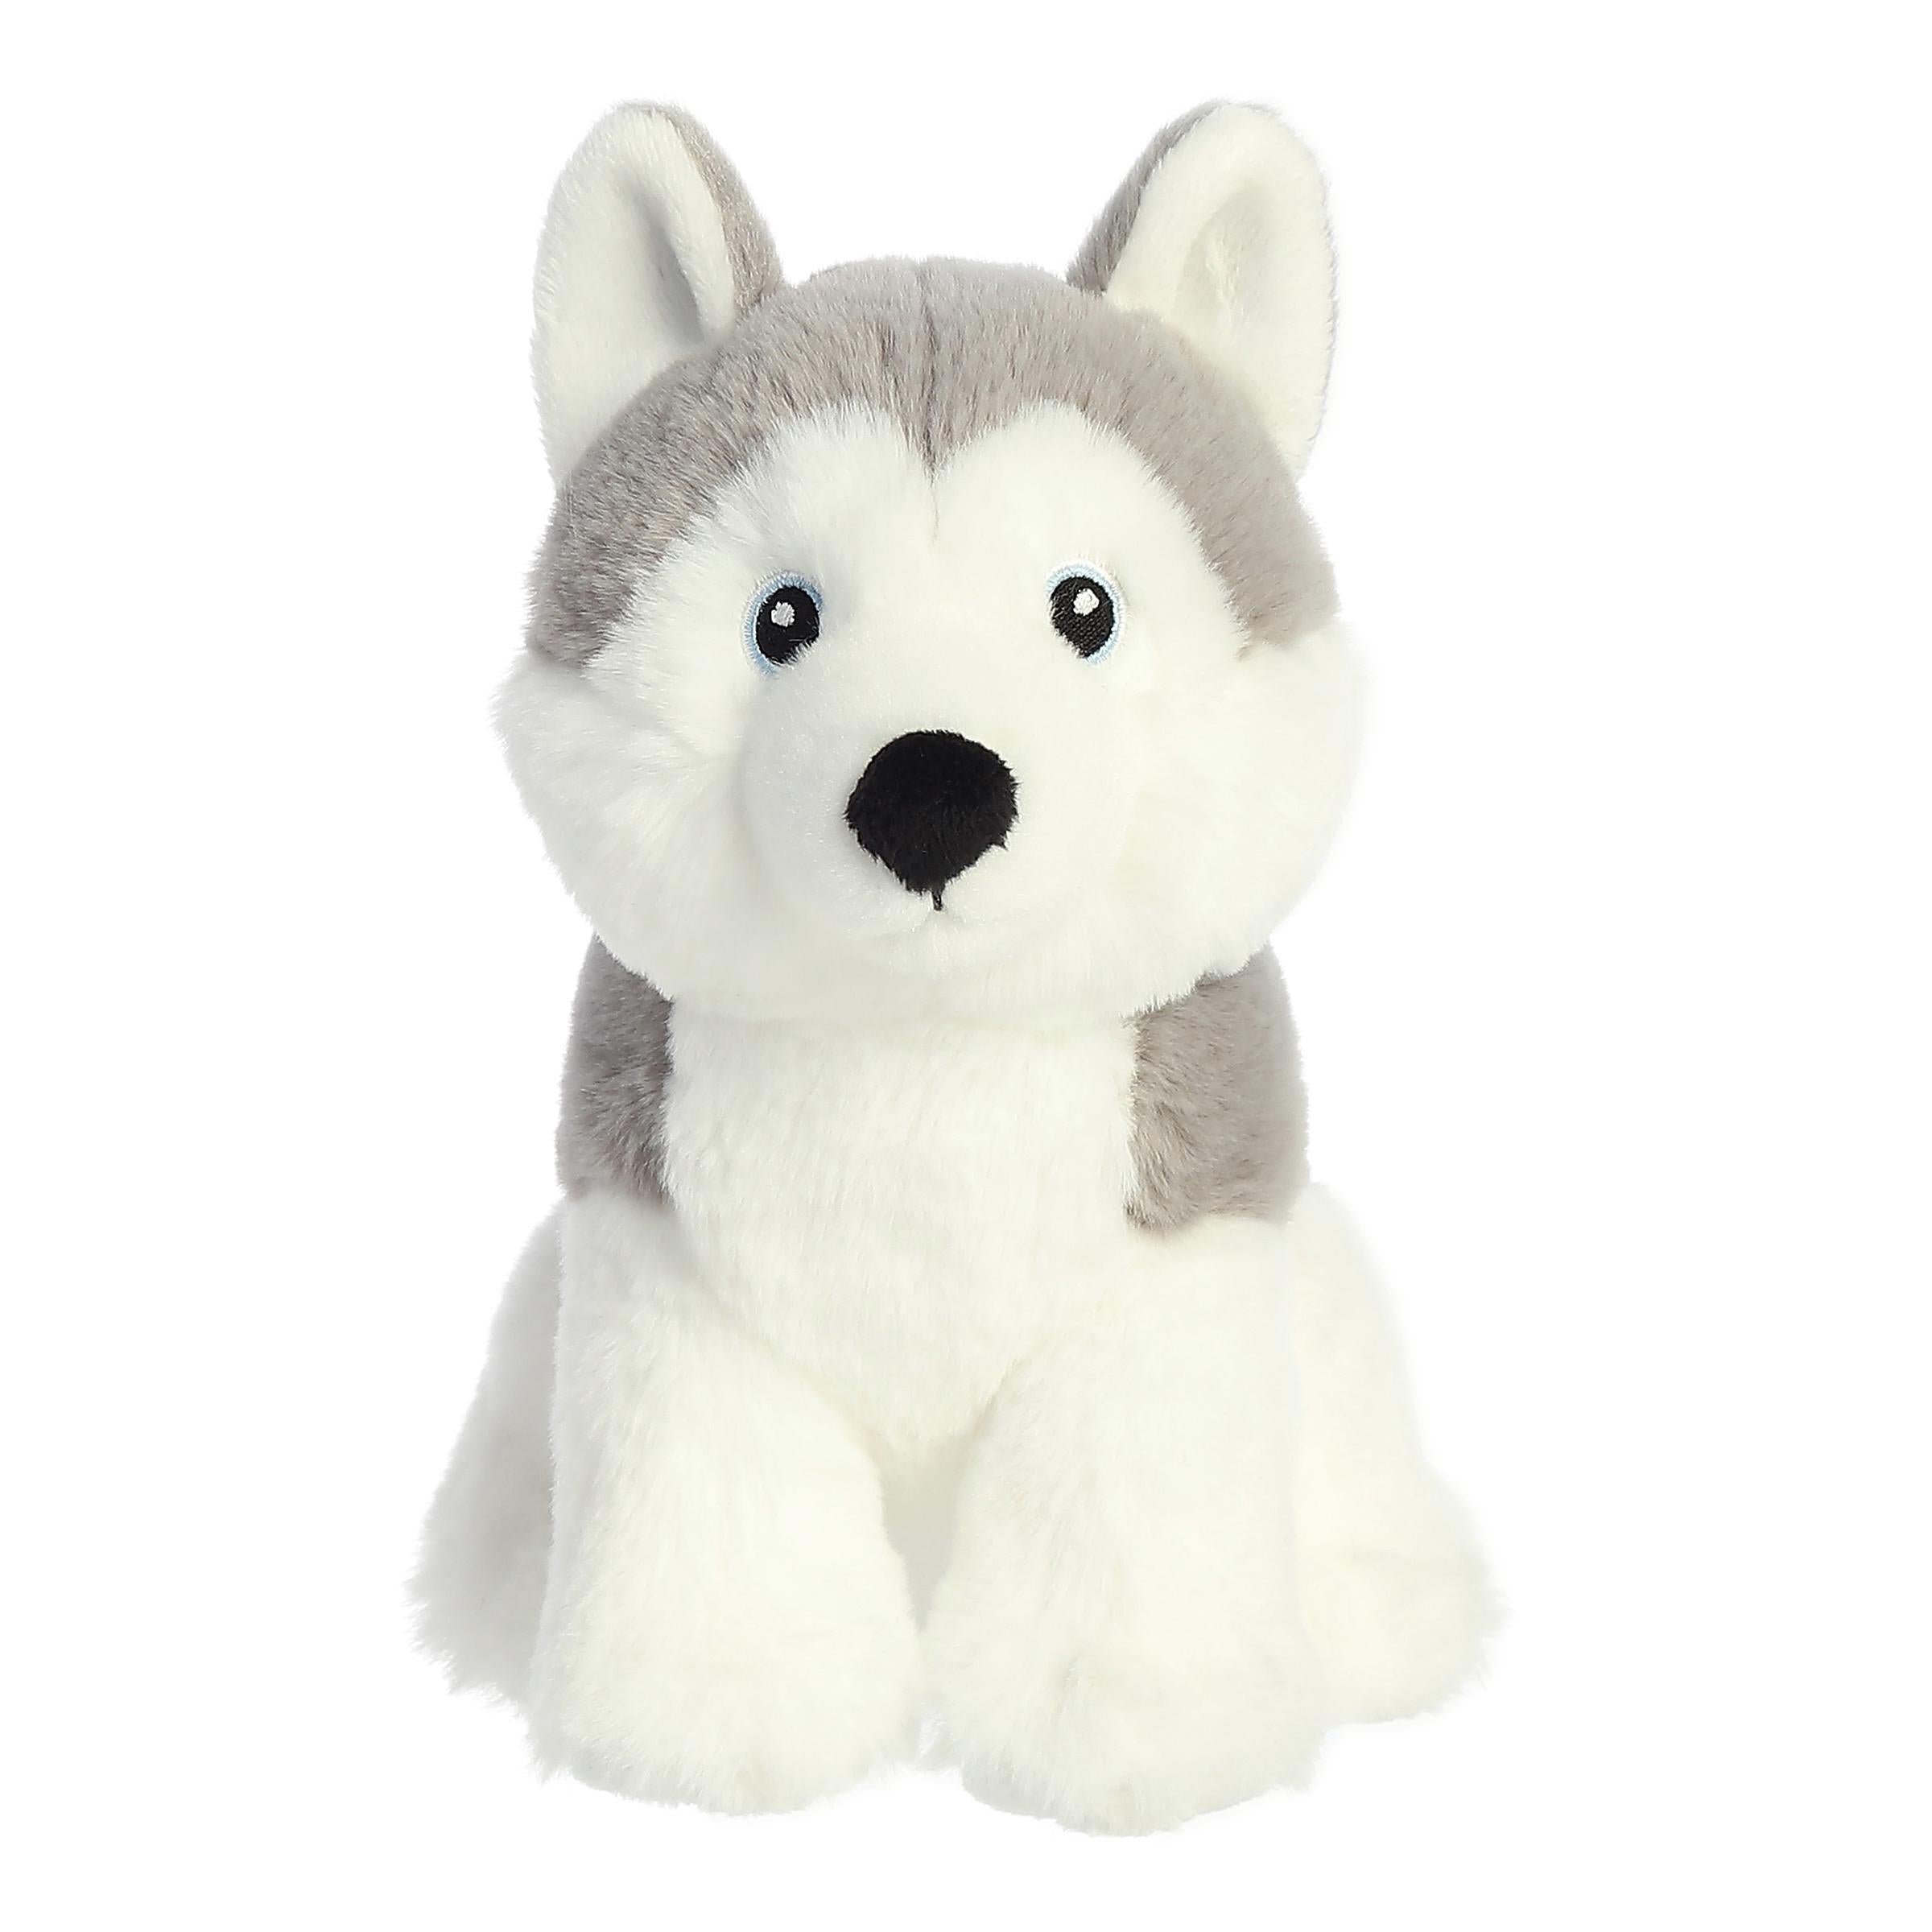 A darling husky plush with grey and white fur, happy embroidered eyes, and an eco-nation collar around its neck